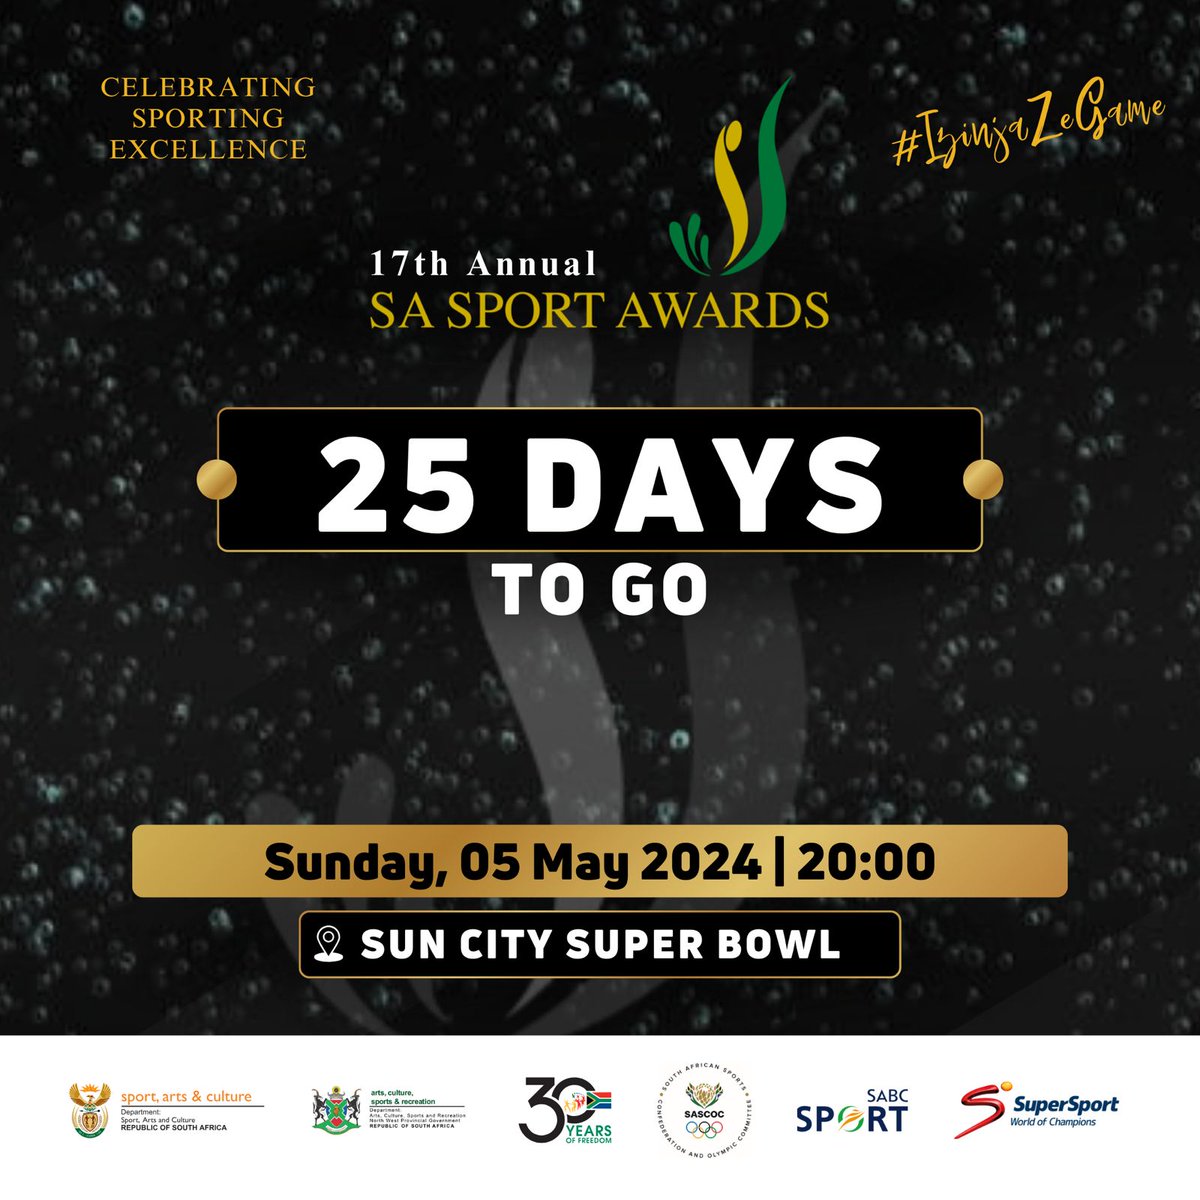 🏆 25 days to go until the prestigious South African Sports Awards! 🎉 . Join us for an unforgettable evening honoring excellence in sportsmanship and dedication. Save the date and stay tuned for more updates! 

#SASAwards🇿🇦🏅

#CelebratingExcellence